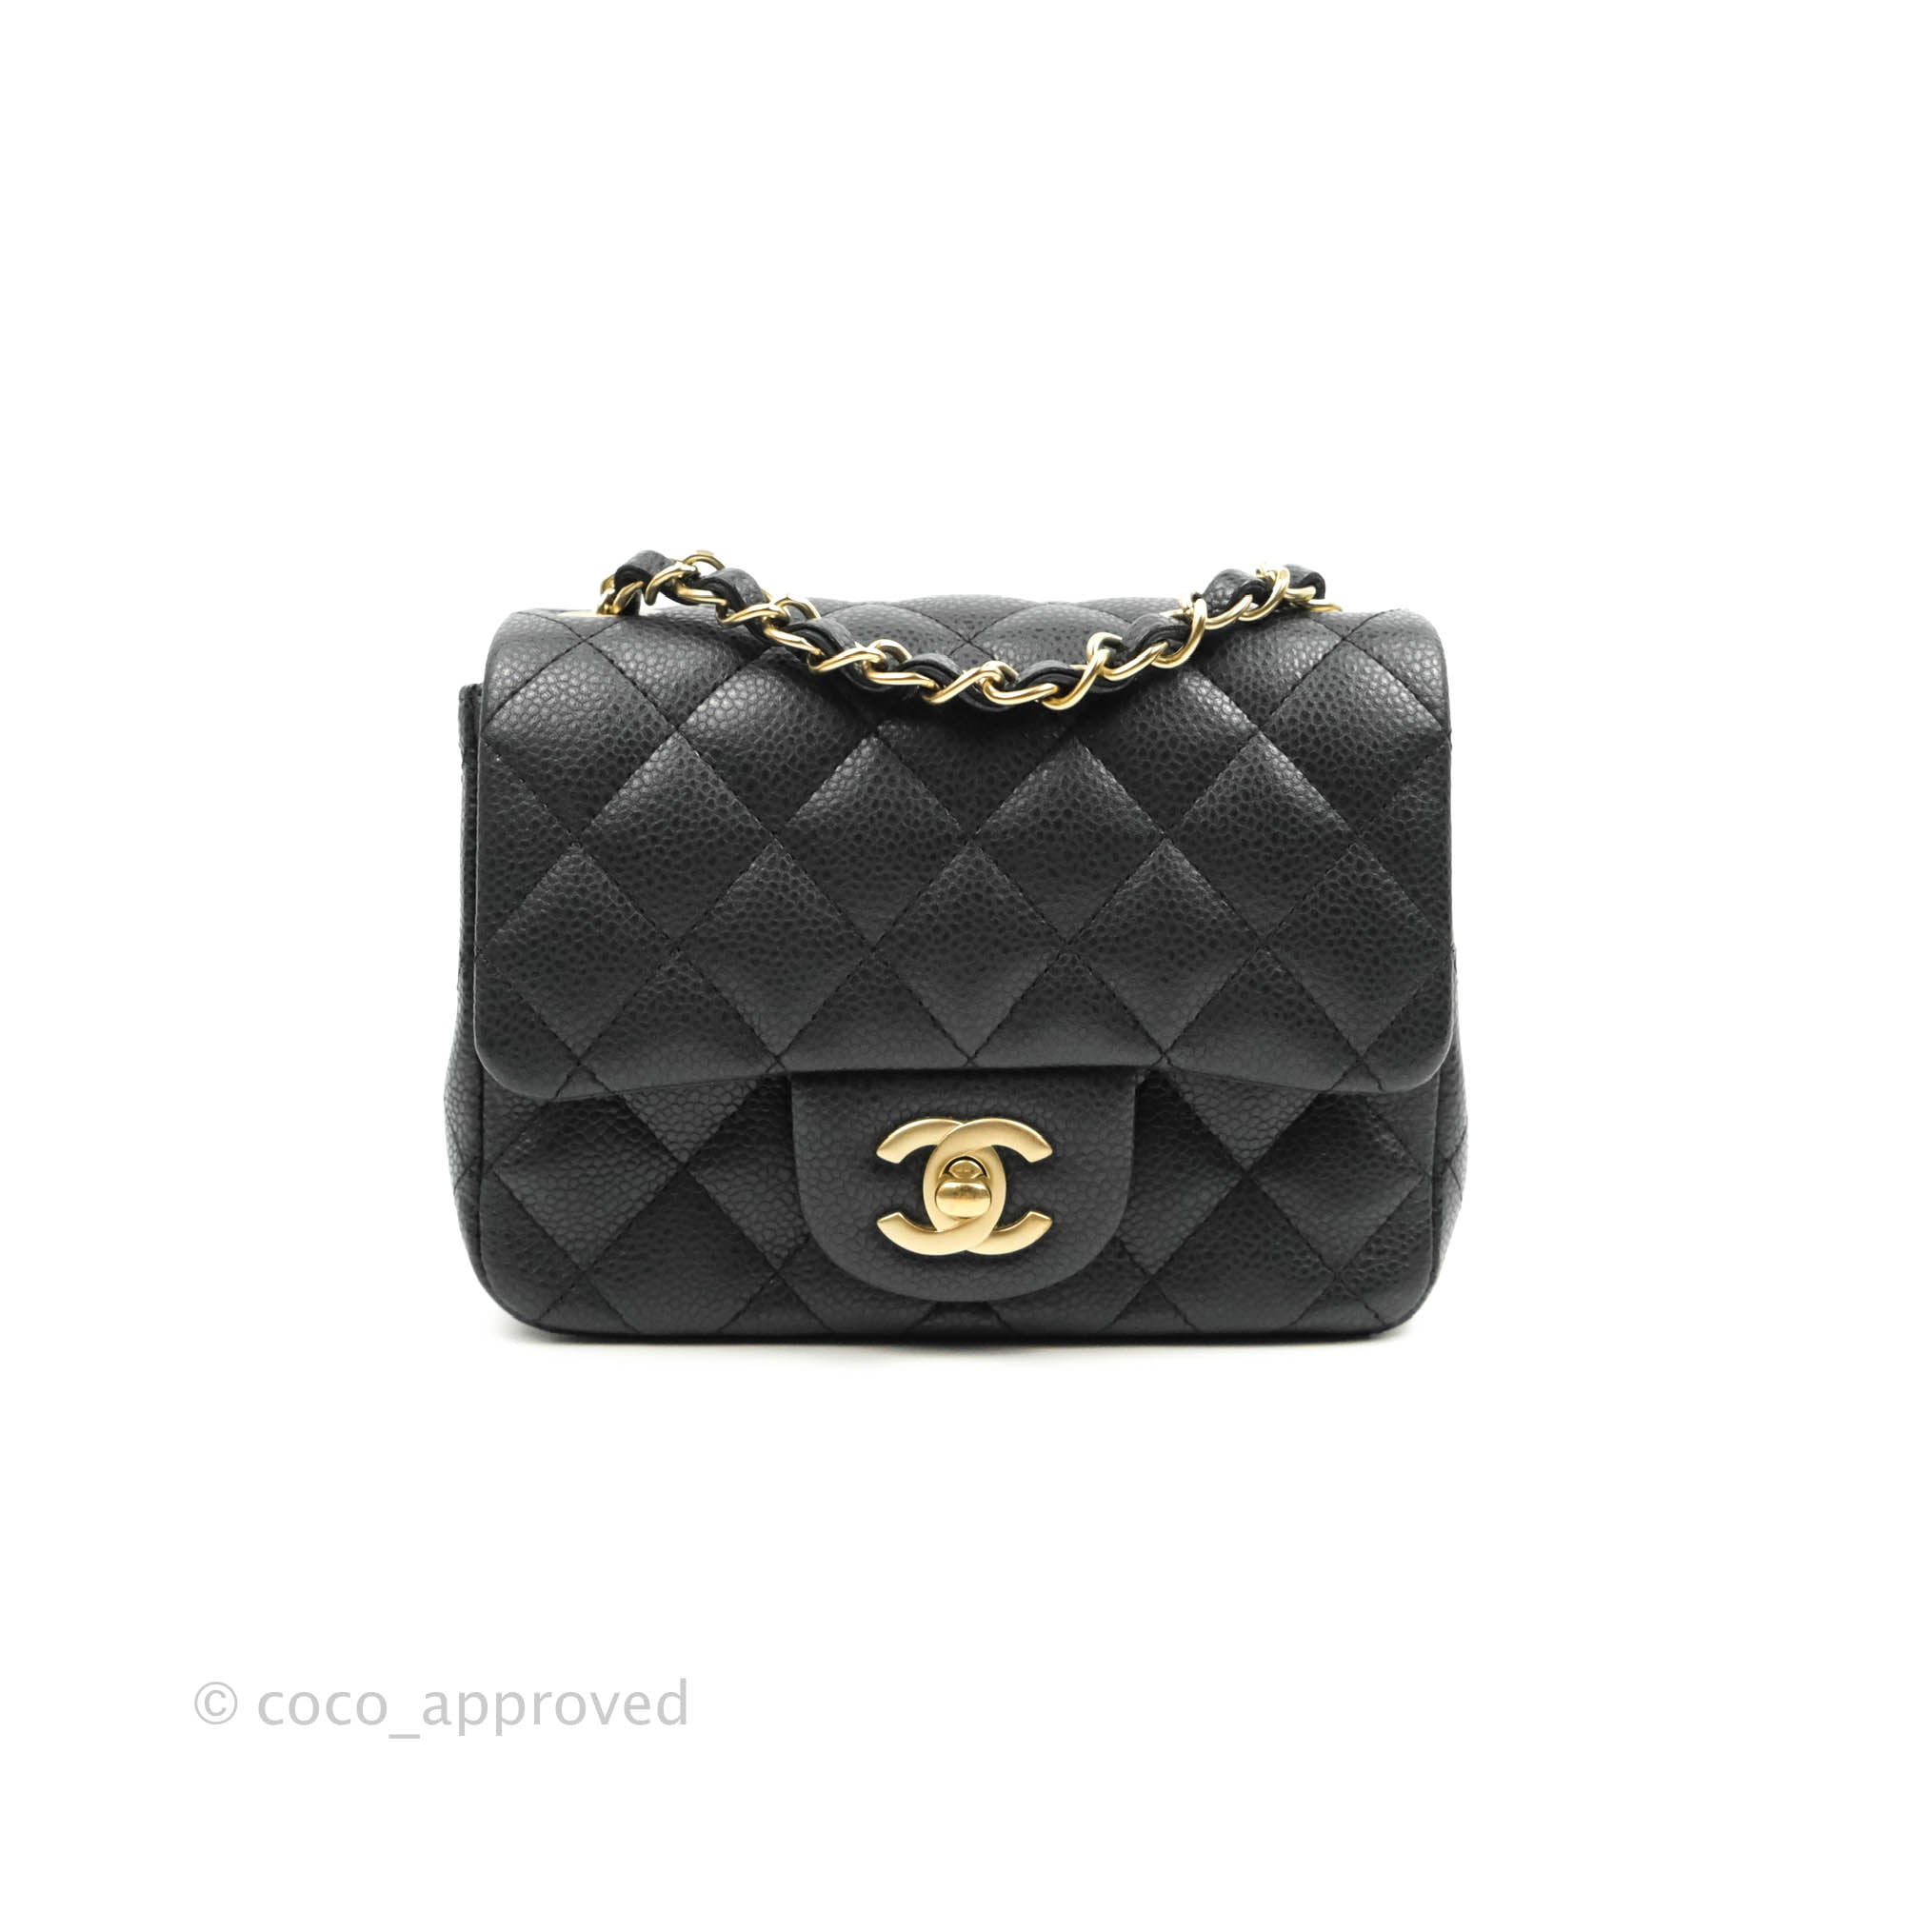 My Paris Time Square - Chanel Black Matte Caviar Quilted Leather